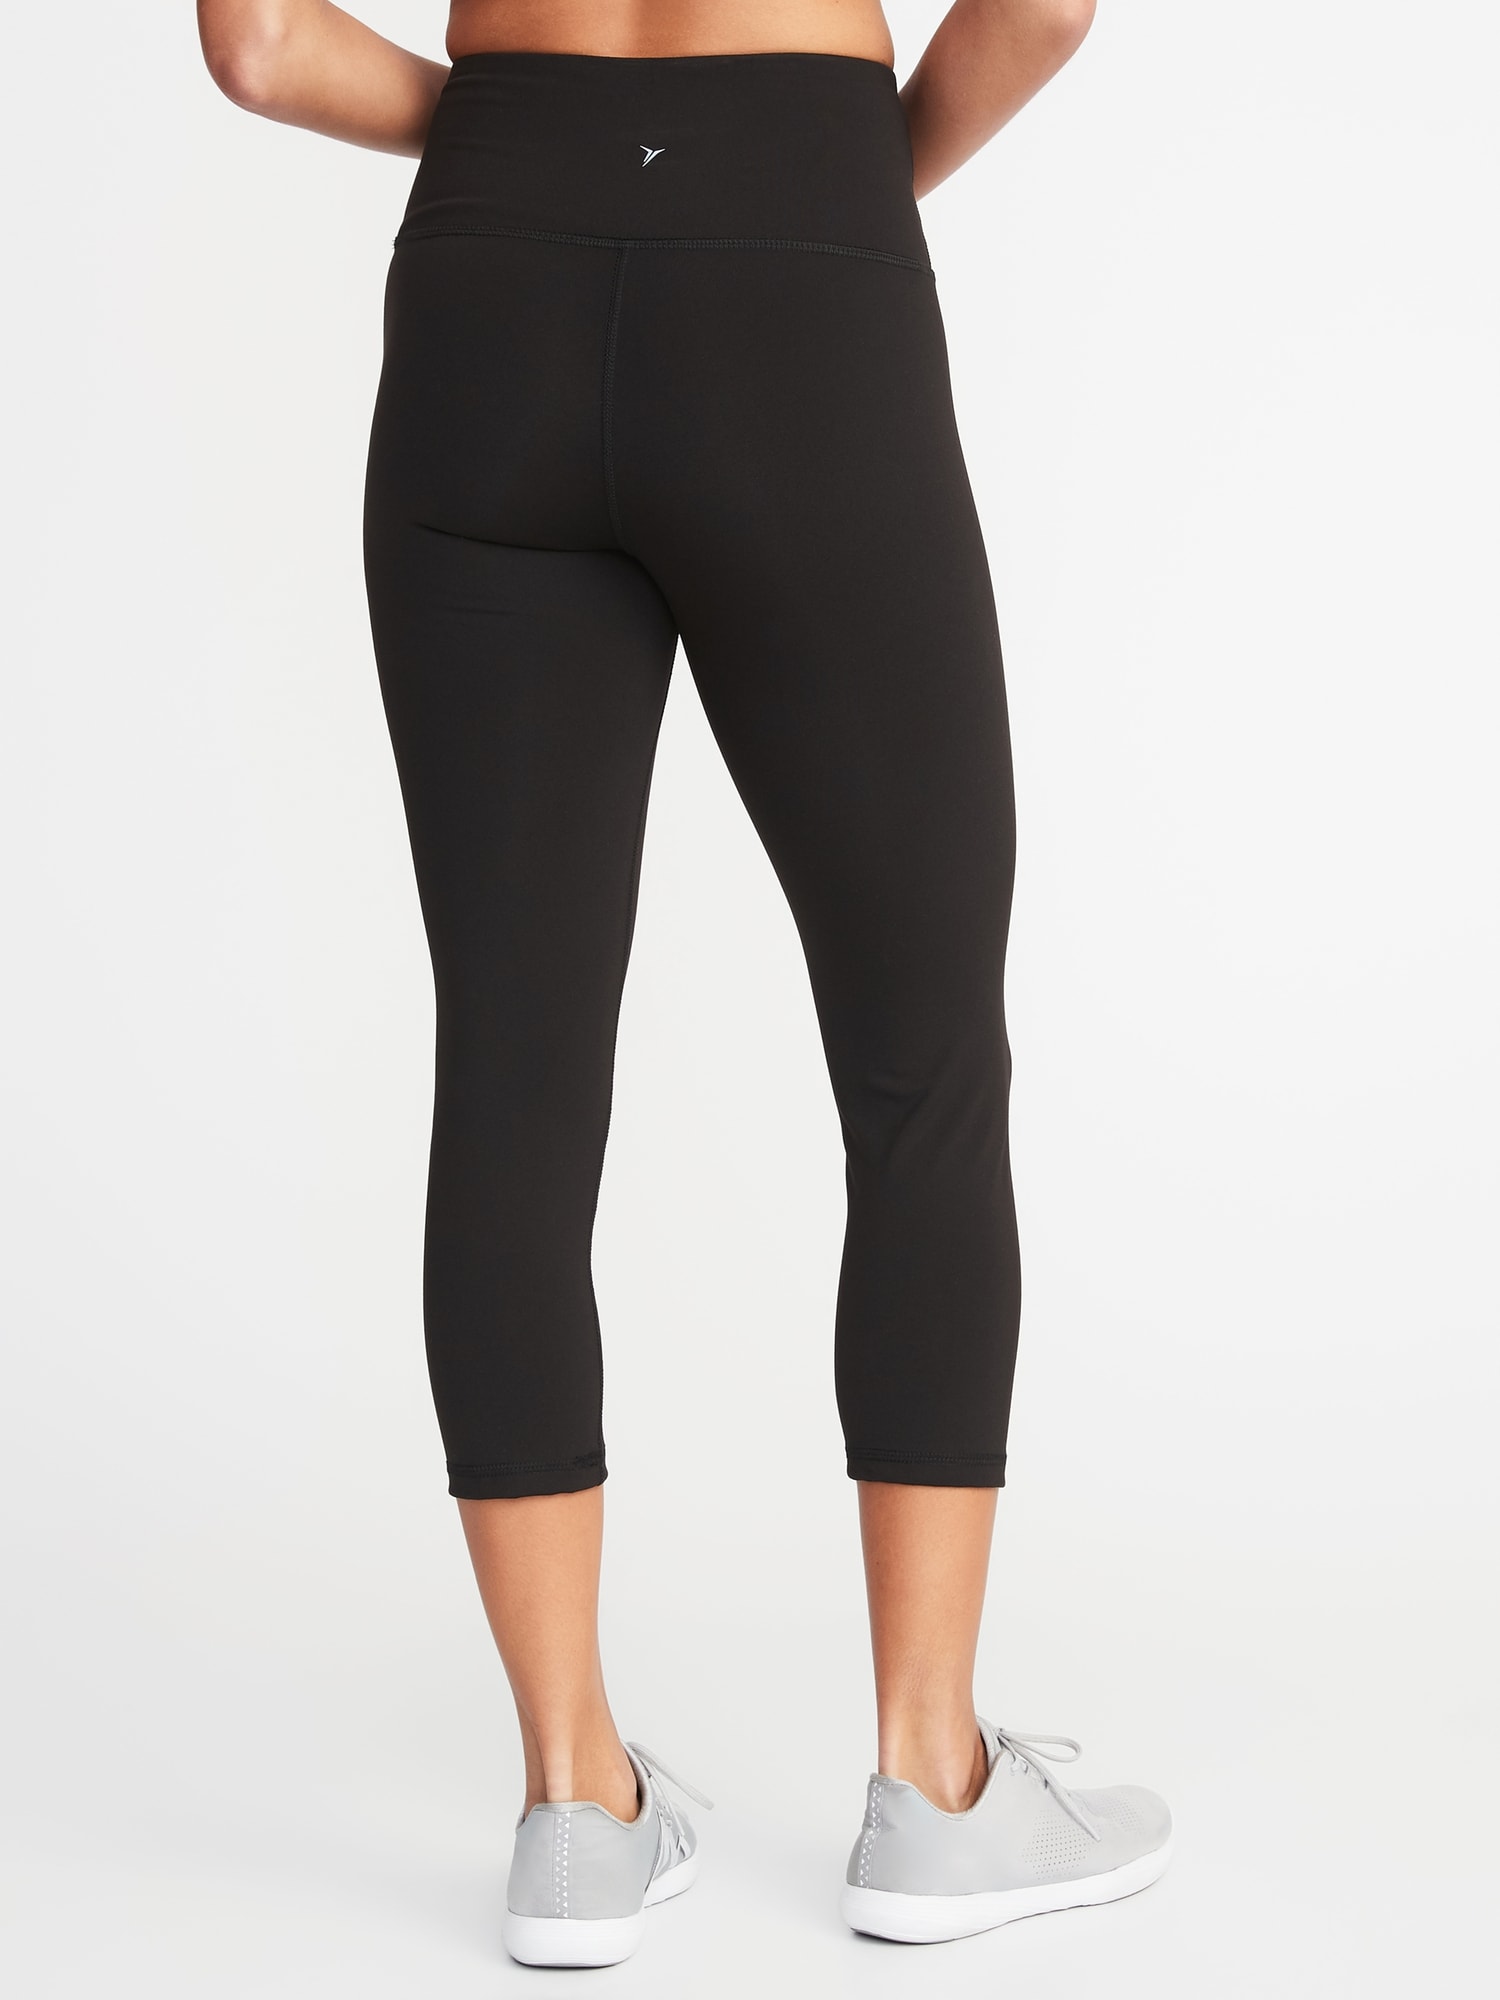 old navy active go dry yoga pants